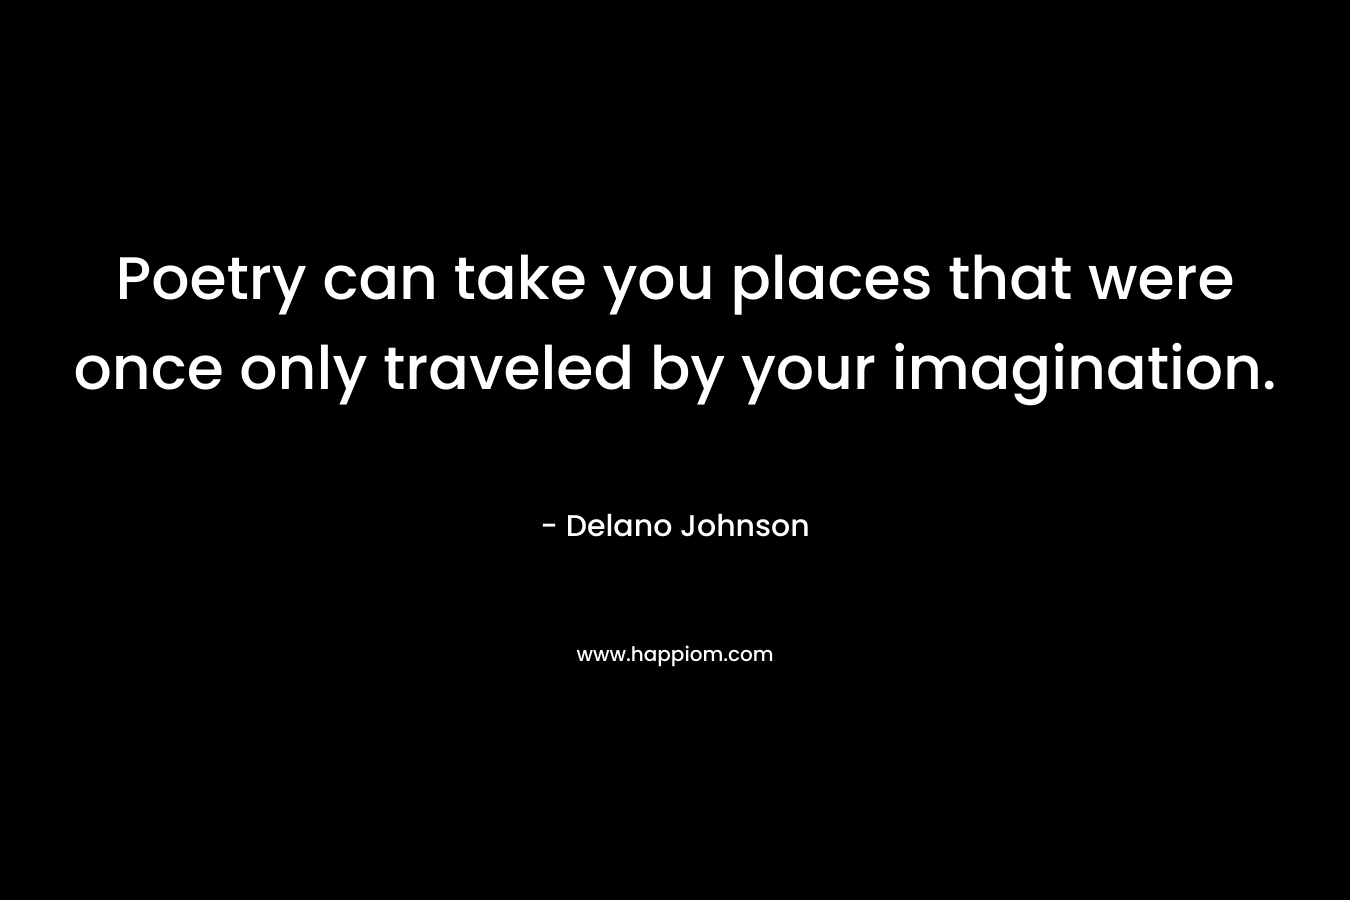 Poetry can take you places that were once only traveled by your imagination.